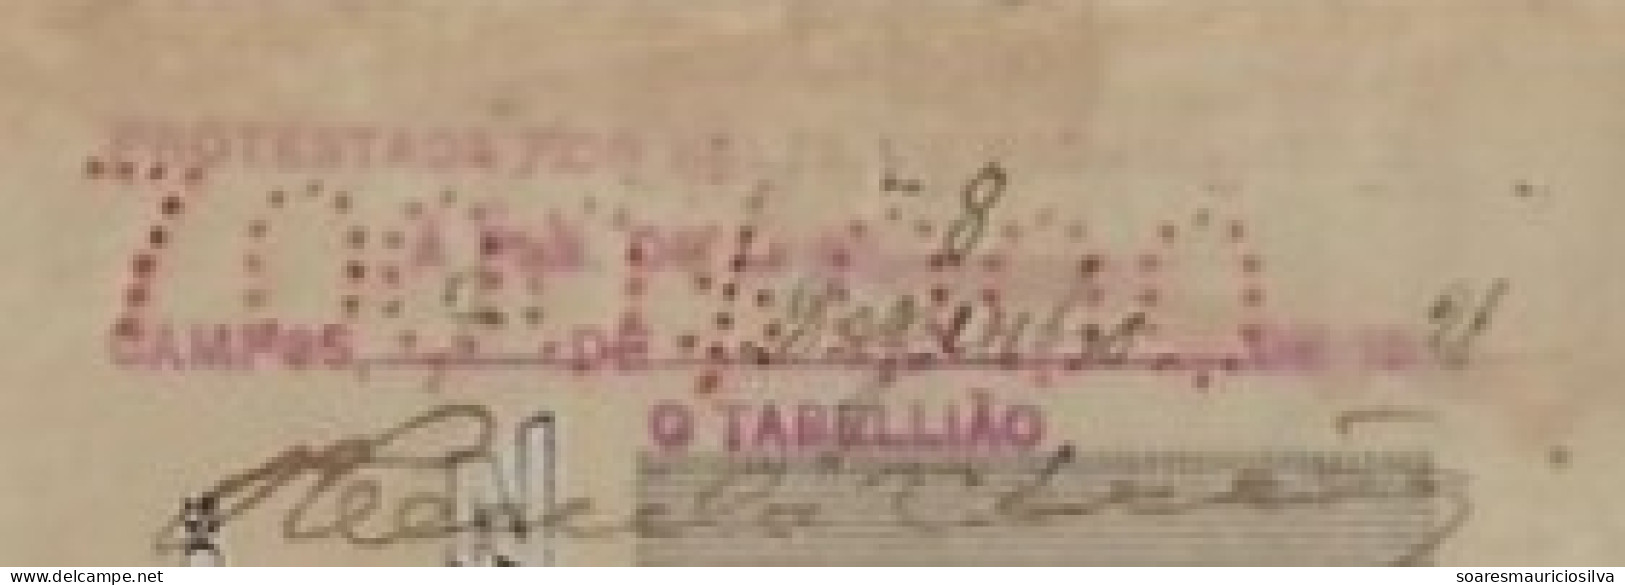 Brazil 1920 Promissory Note Issued Campos National Treasury +State Of Rio De Janeiro Tax Stamp Protest Cancel Perforated - Storia Postale